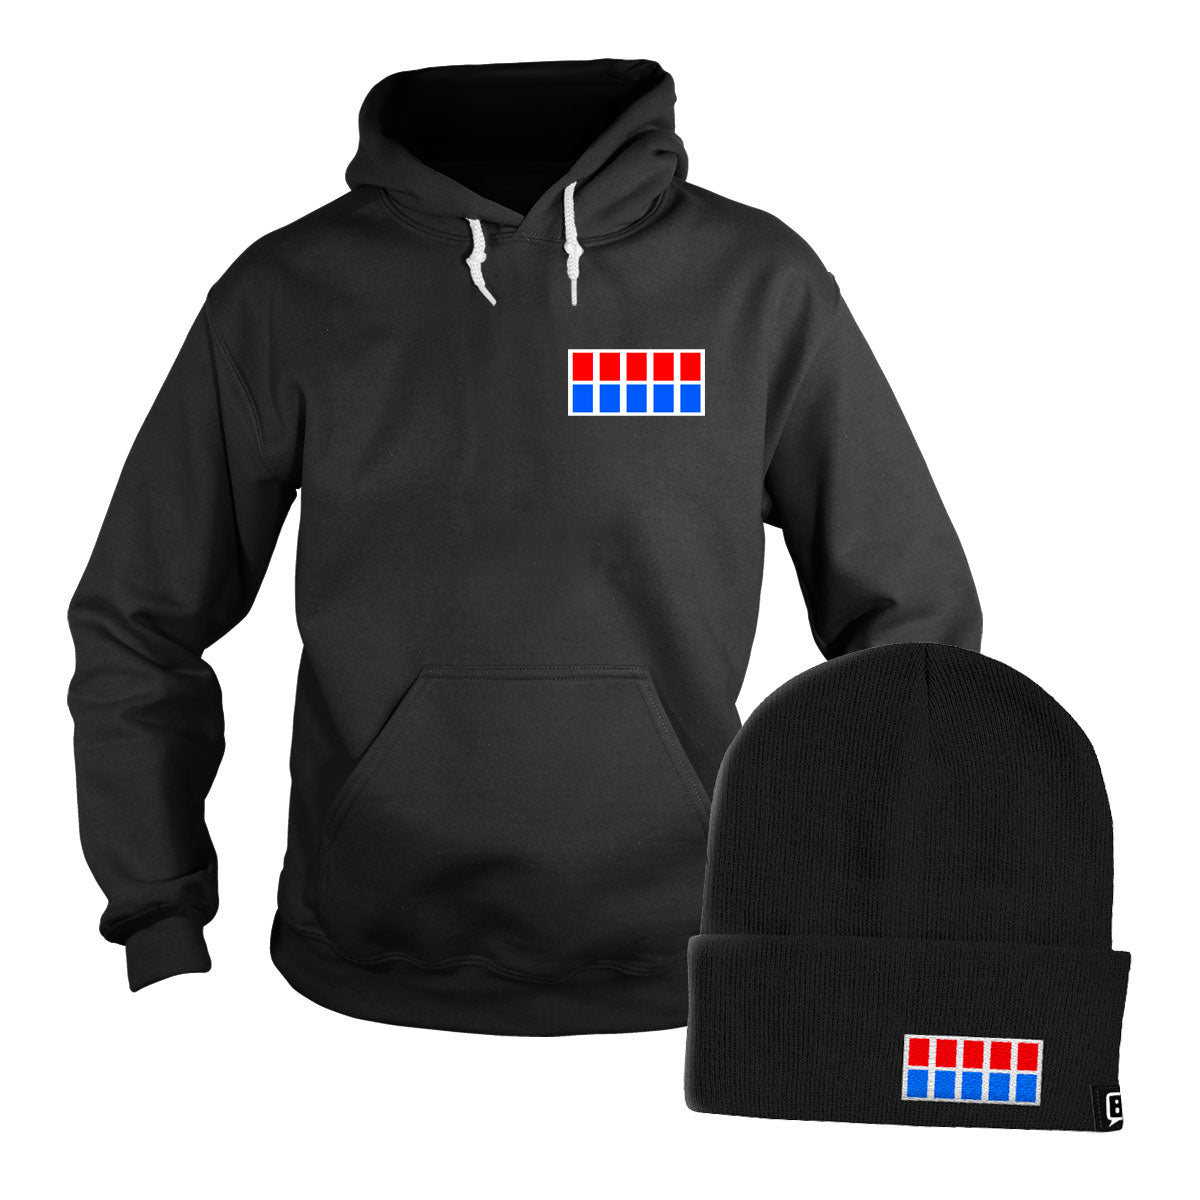 Imperial Officer Hoodie + Free Beanie - BustedTees.com